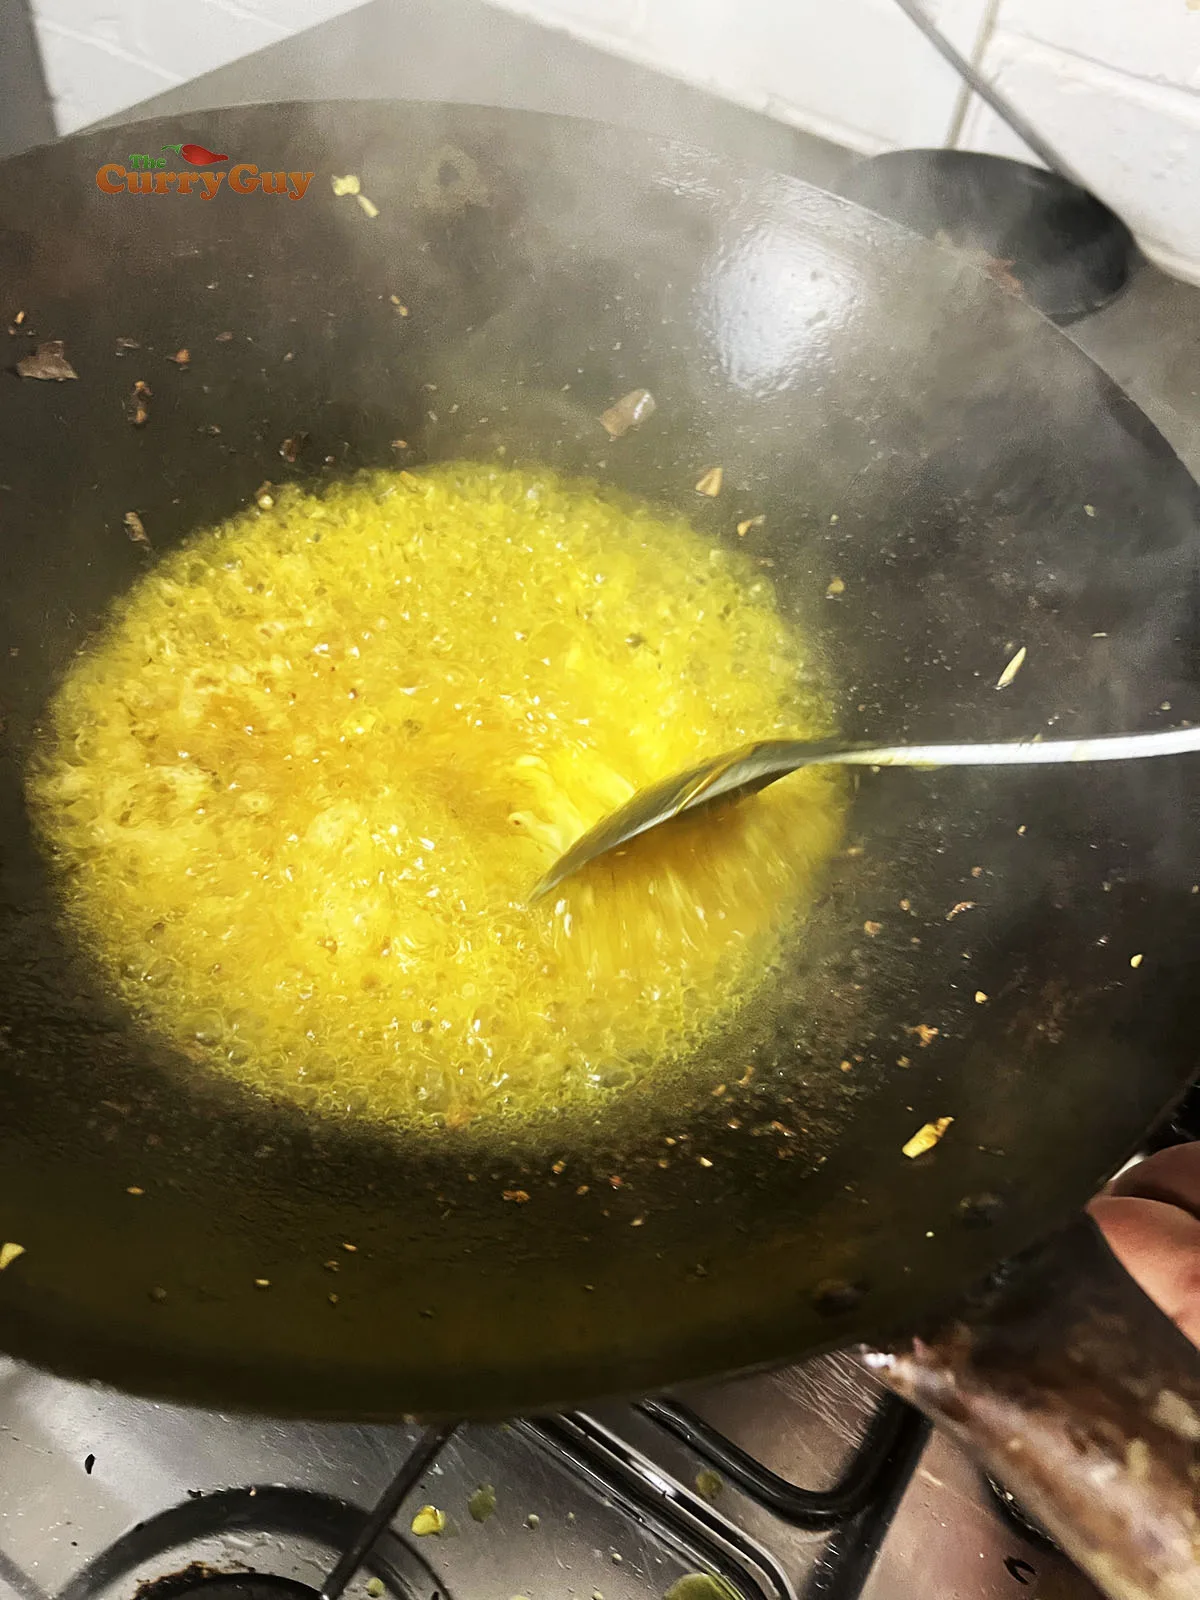 Frying ghee and yoghurt together